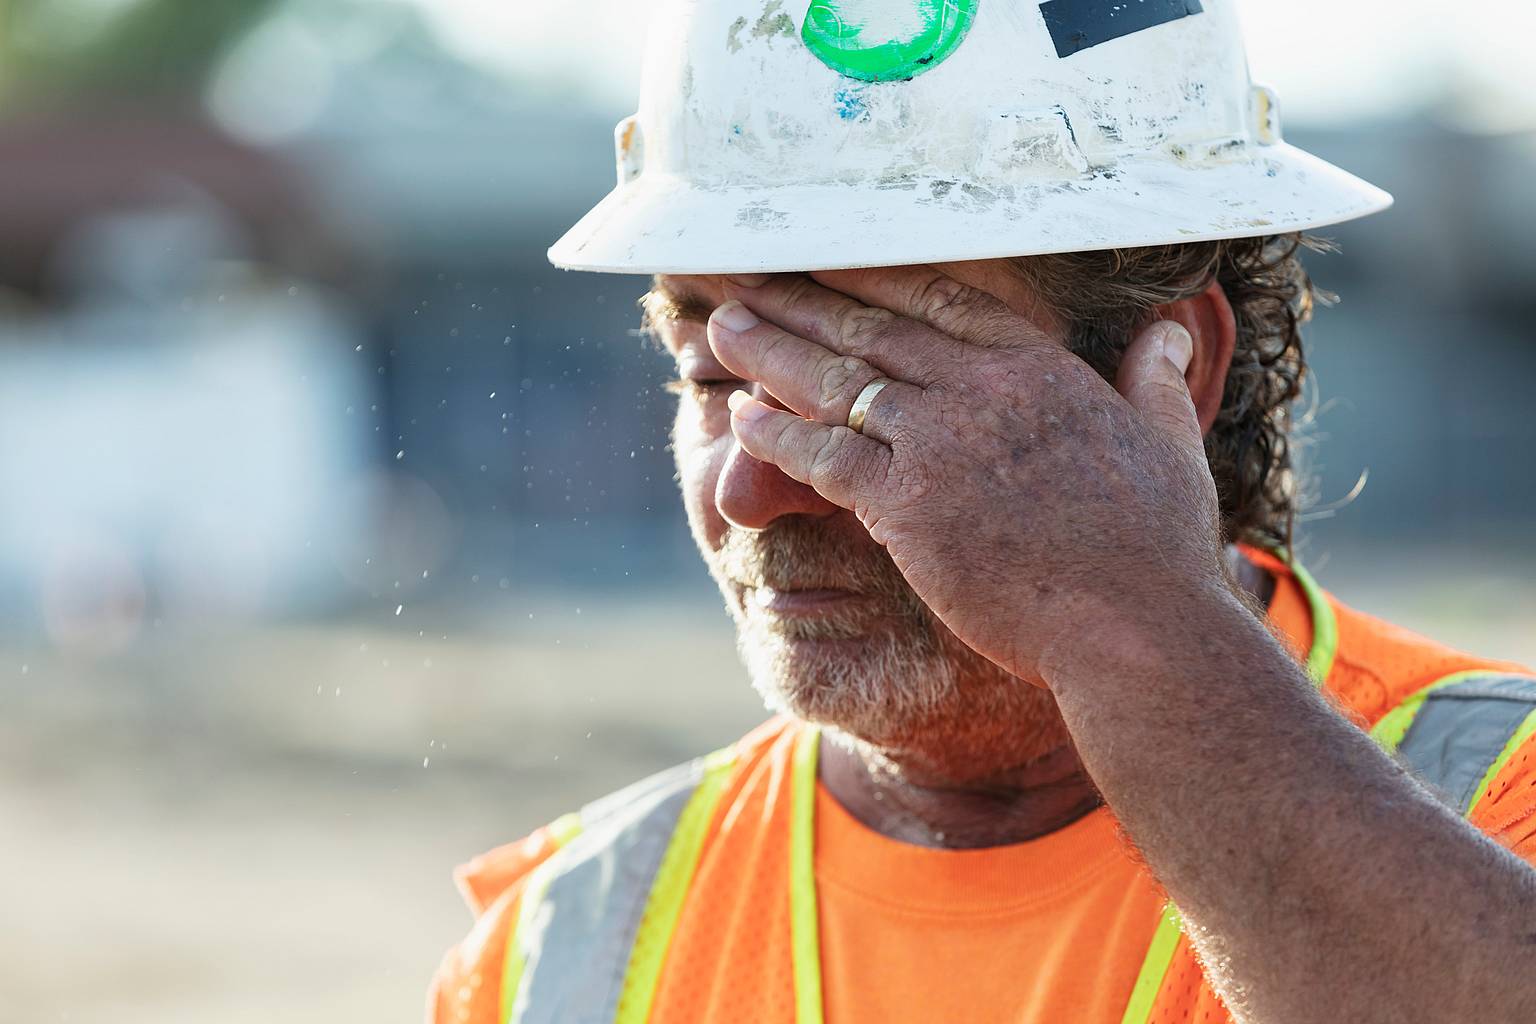 A construction worker showing the effects of working in hot conditions.